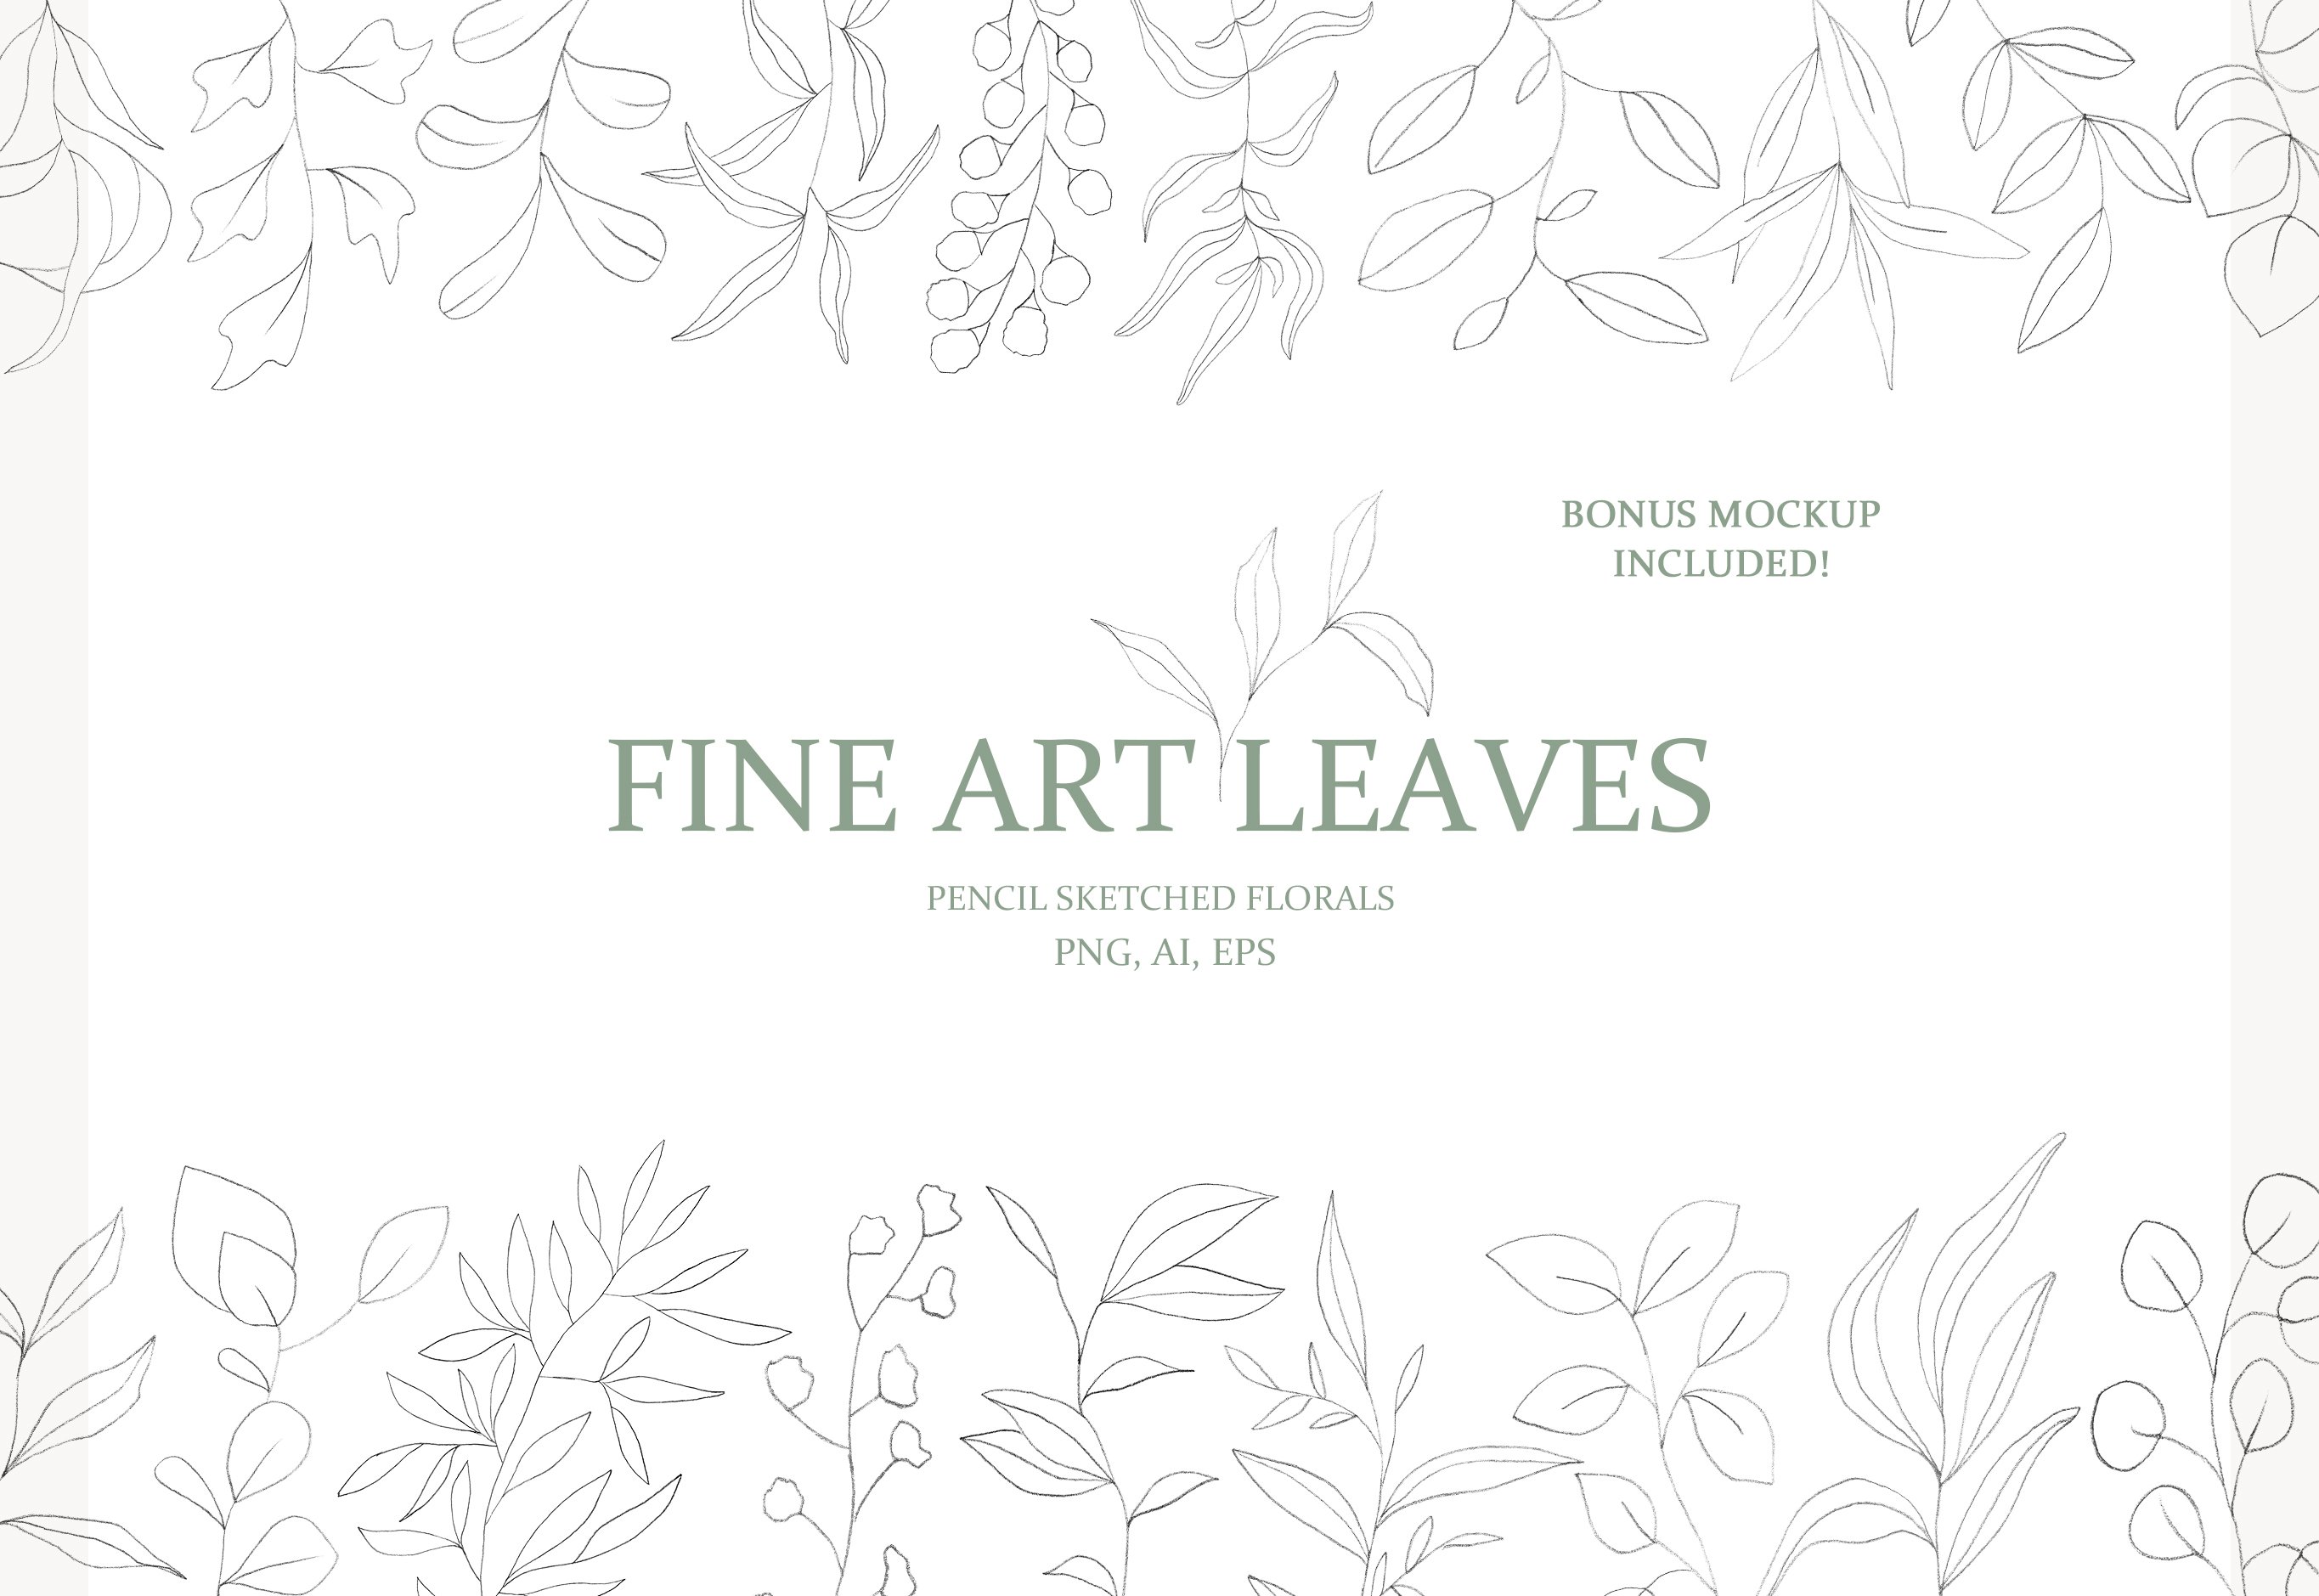 Fine Art Leaves - Pencil Sketches cover image.